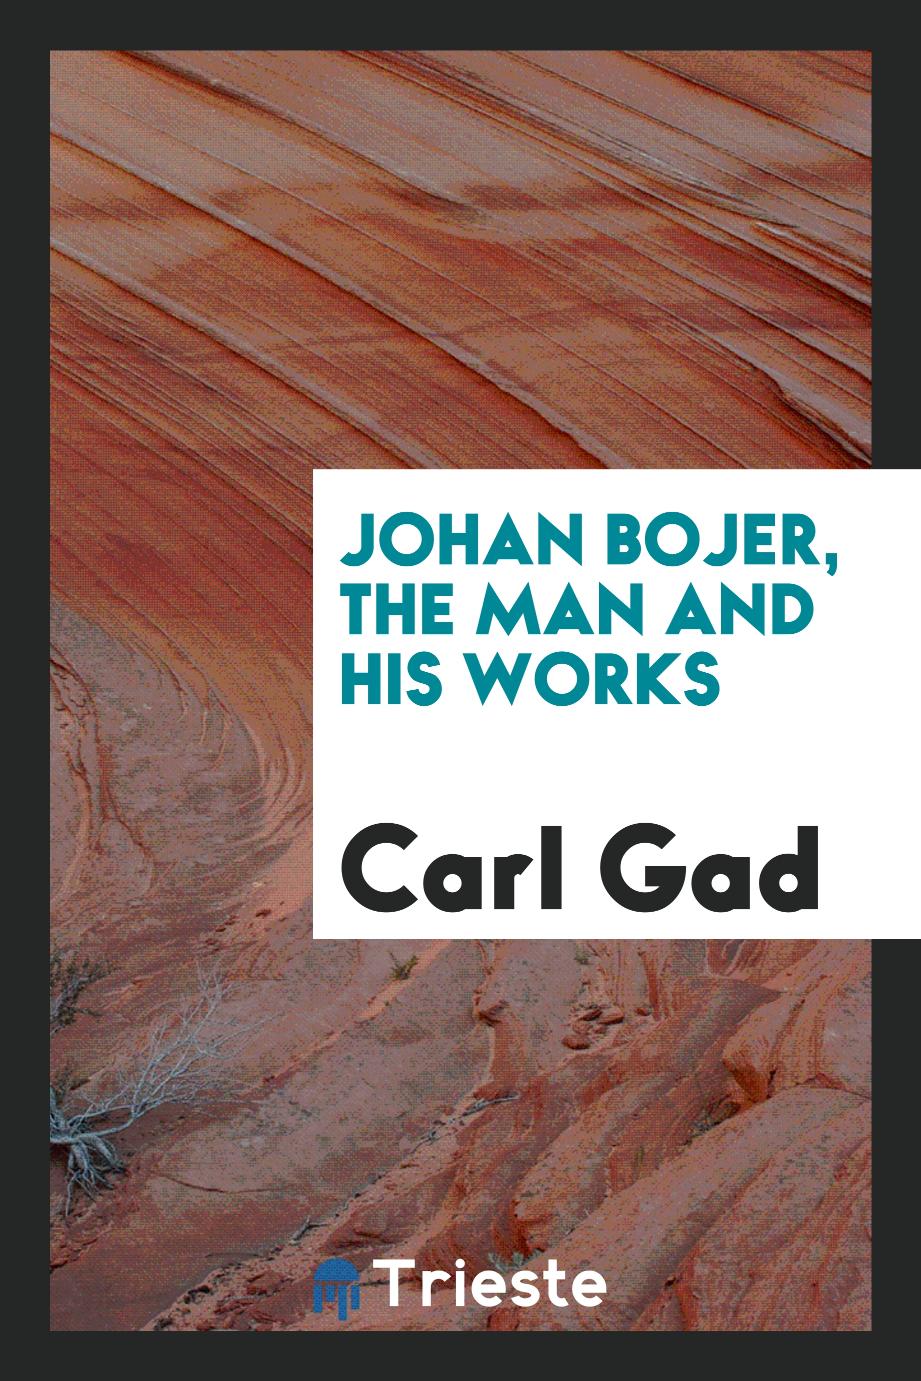 Johan Bojer, the man and his works